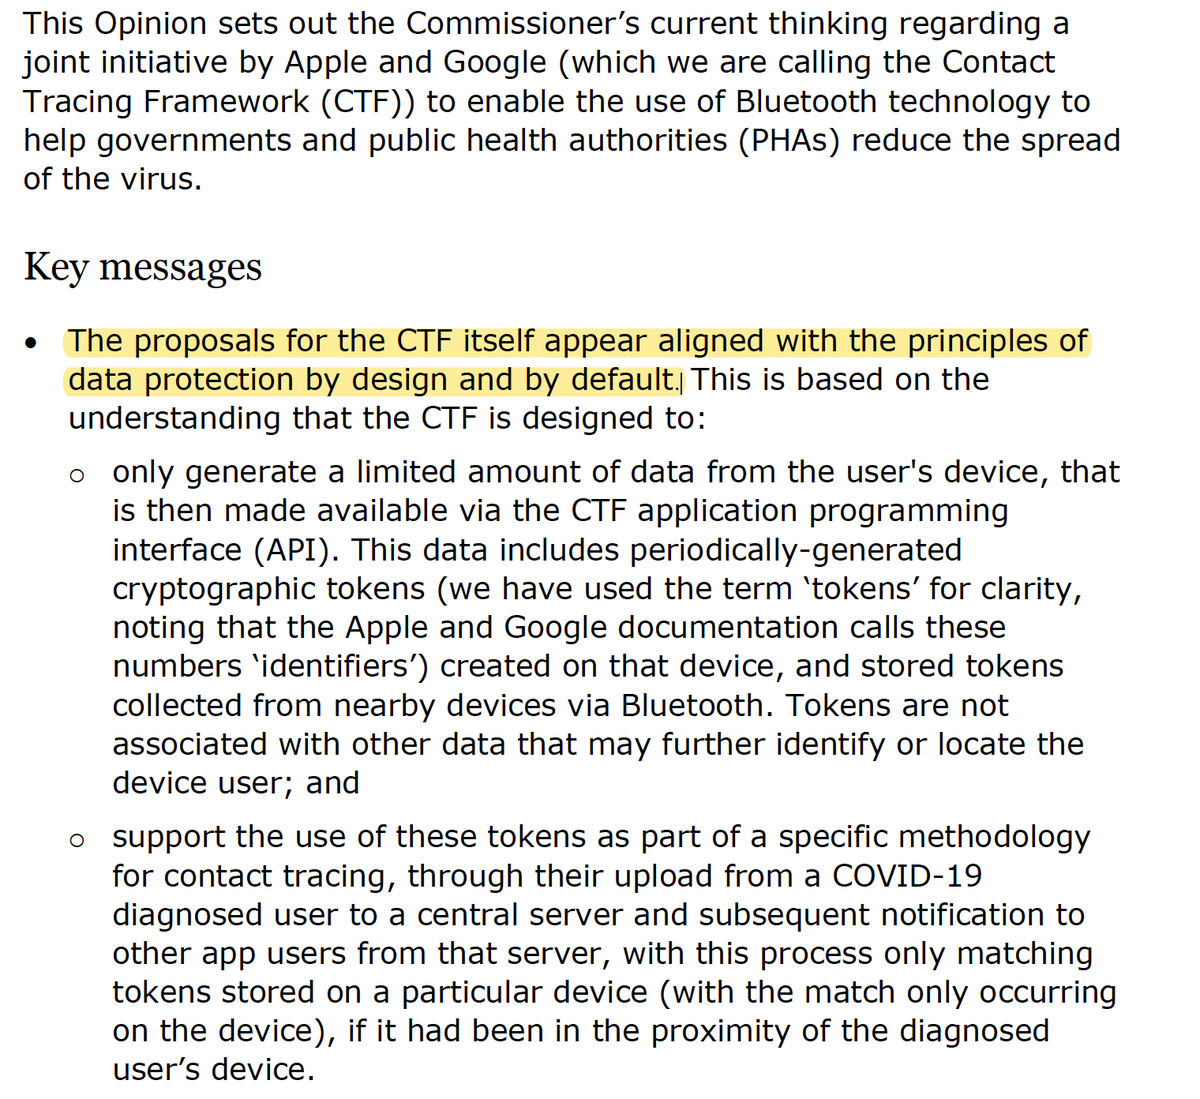 Here is an Information Commissioner preliminary opinion on the contact tracing framework. Really interesting as it gives detail on how the privacy settings will work using 'cryptographic tokens' which will not reveal personal data  https://ico.org.uk/media/about-the-ico/documents/2617653/apple-google-api-opinion-final-april-2020.pdf /111